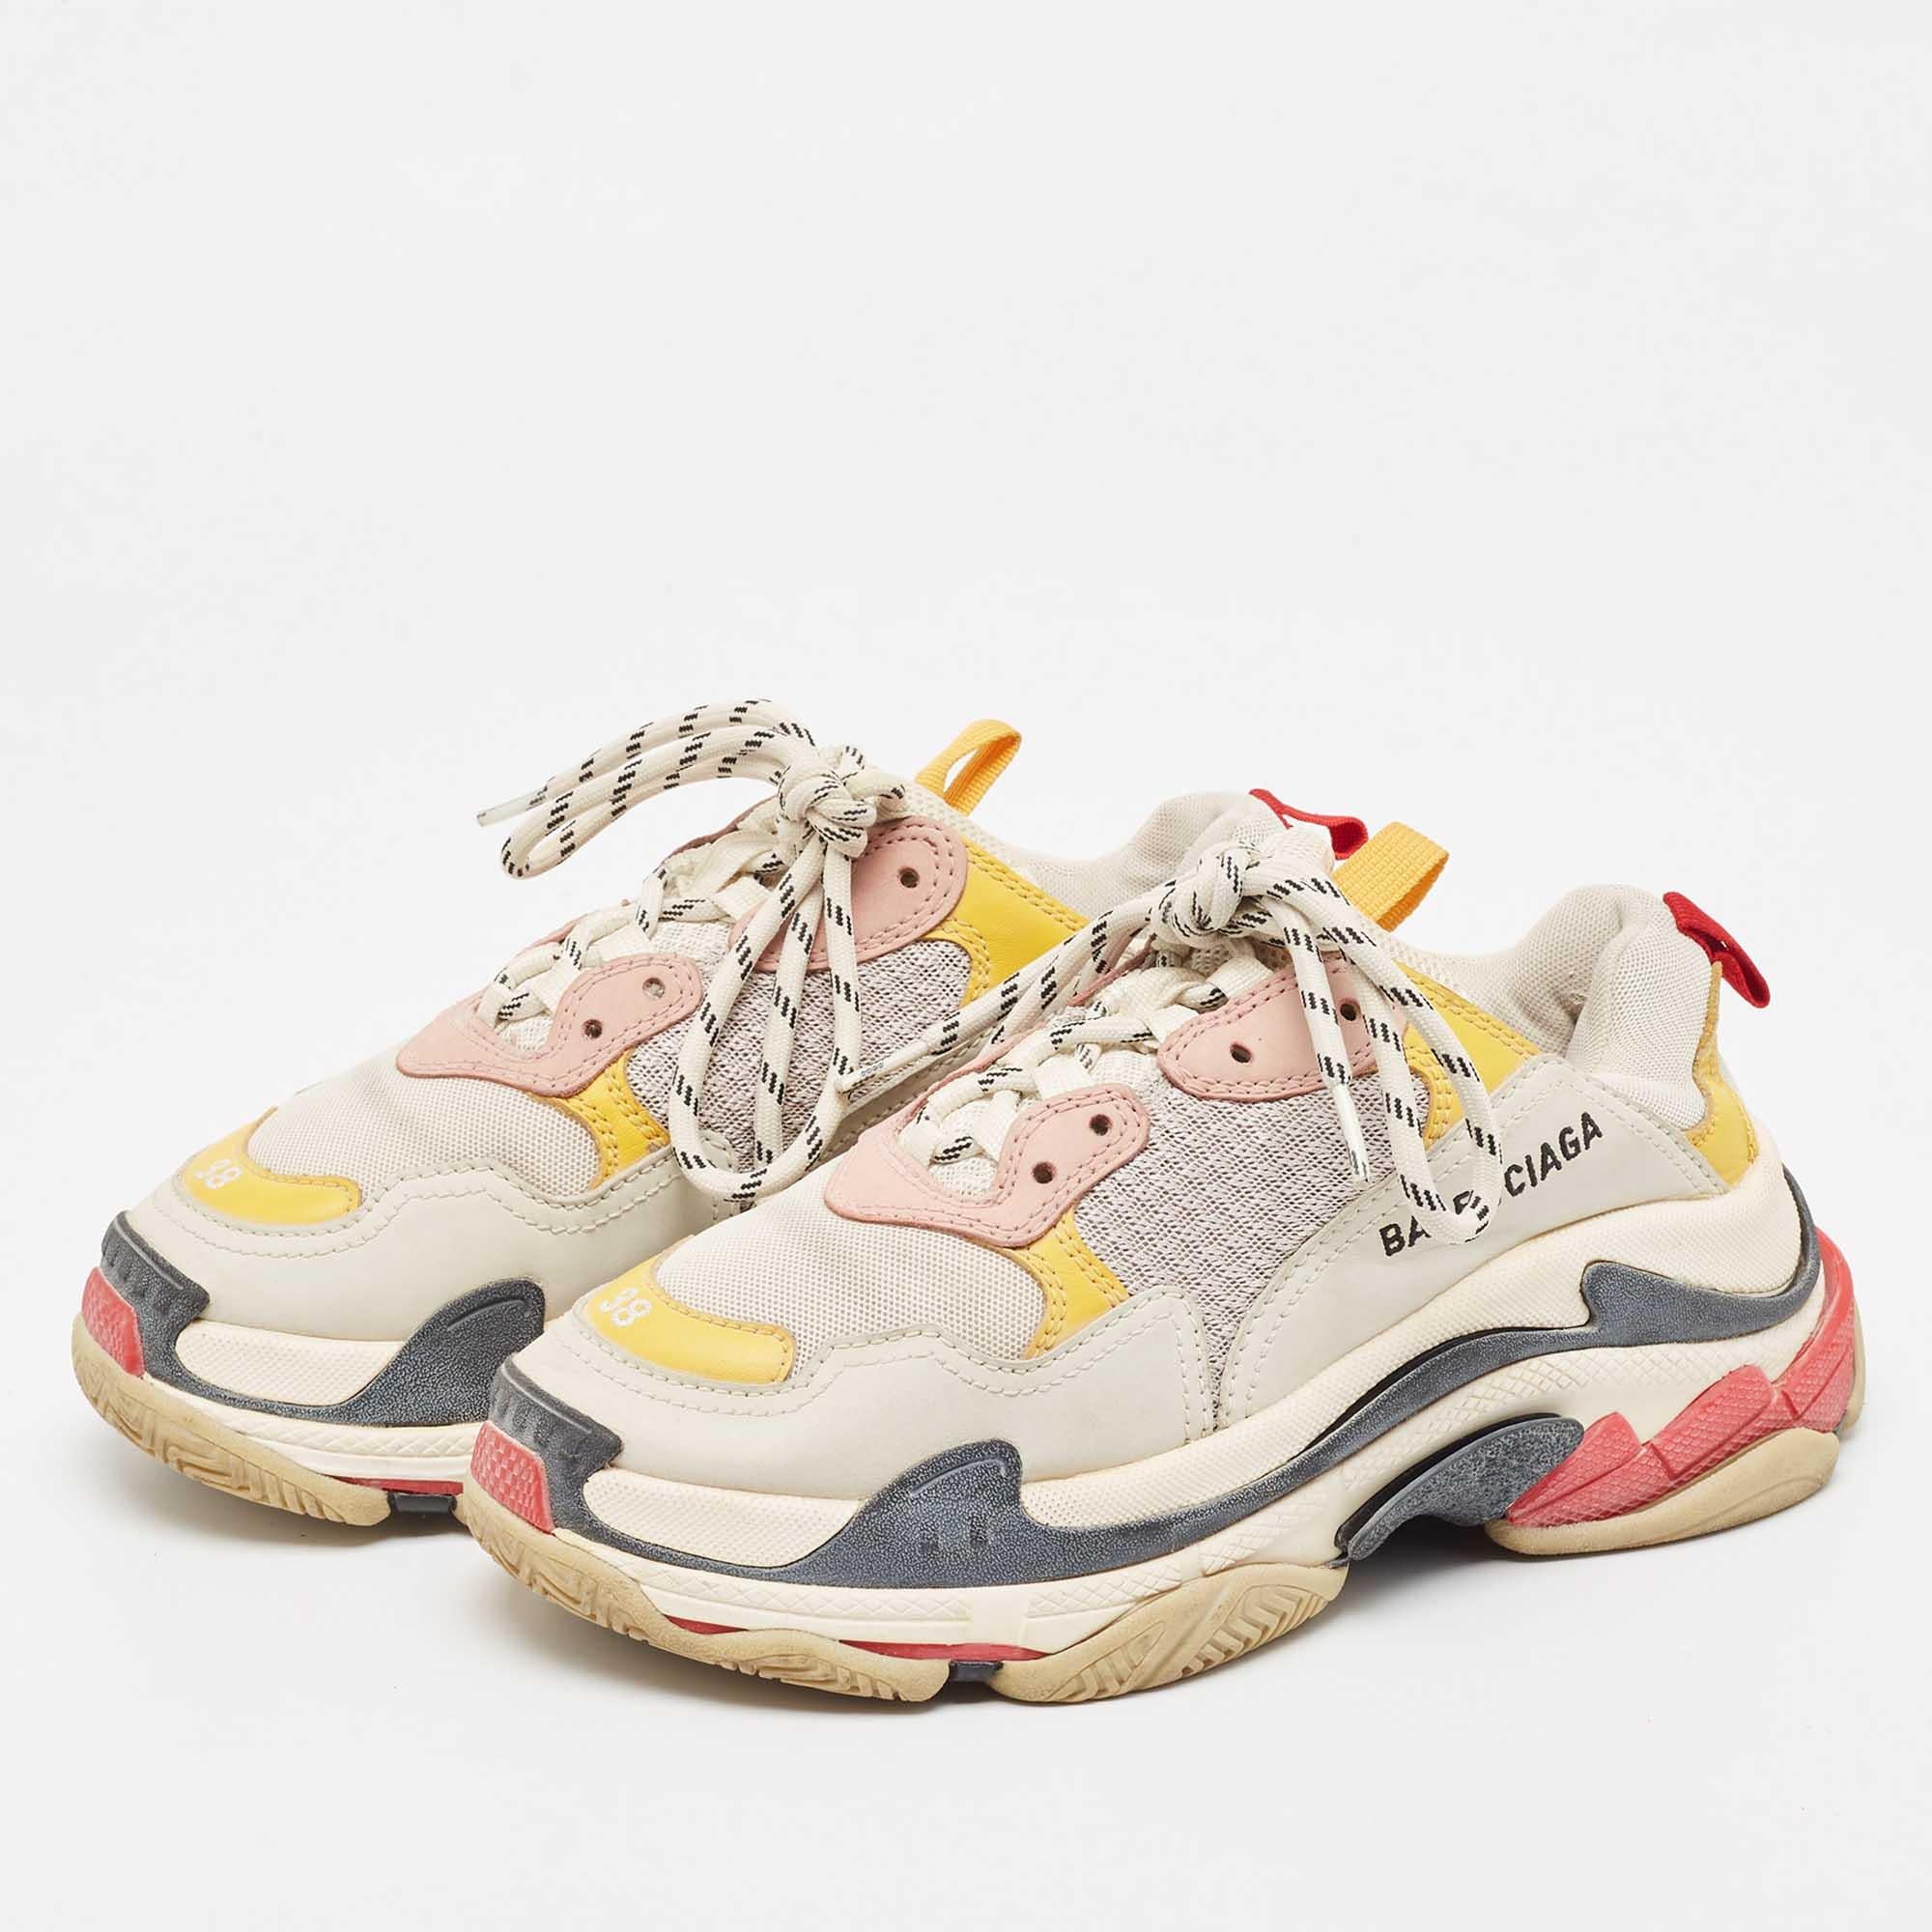 Give your outfit a luxe update with this pair of Balenciaga Triple S sneakers. The shoes are sewn perfectly to help you make a statement in them for a long time.

